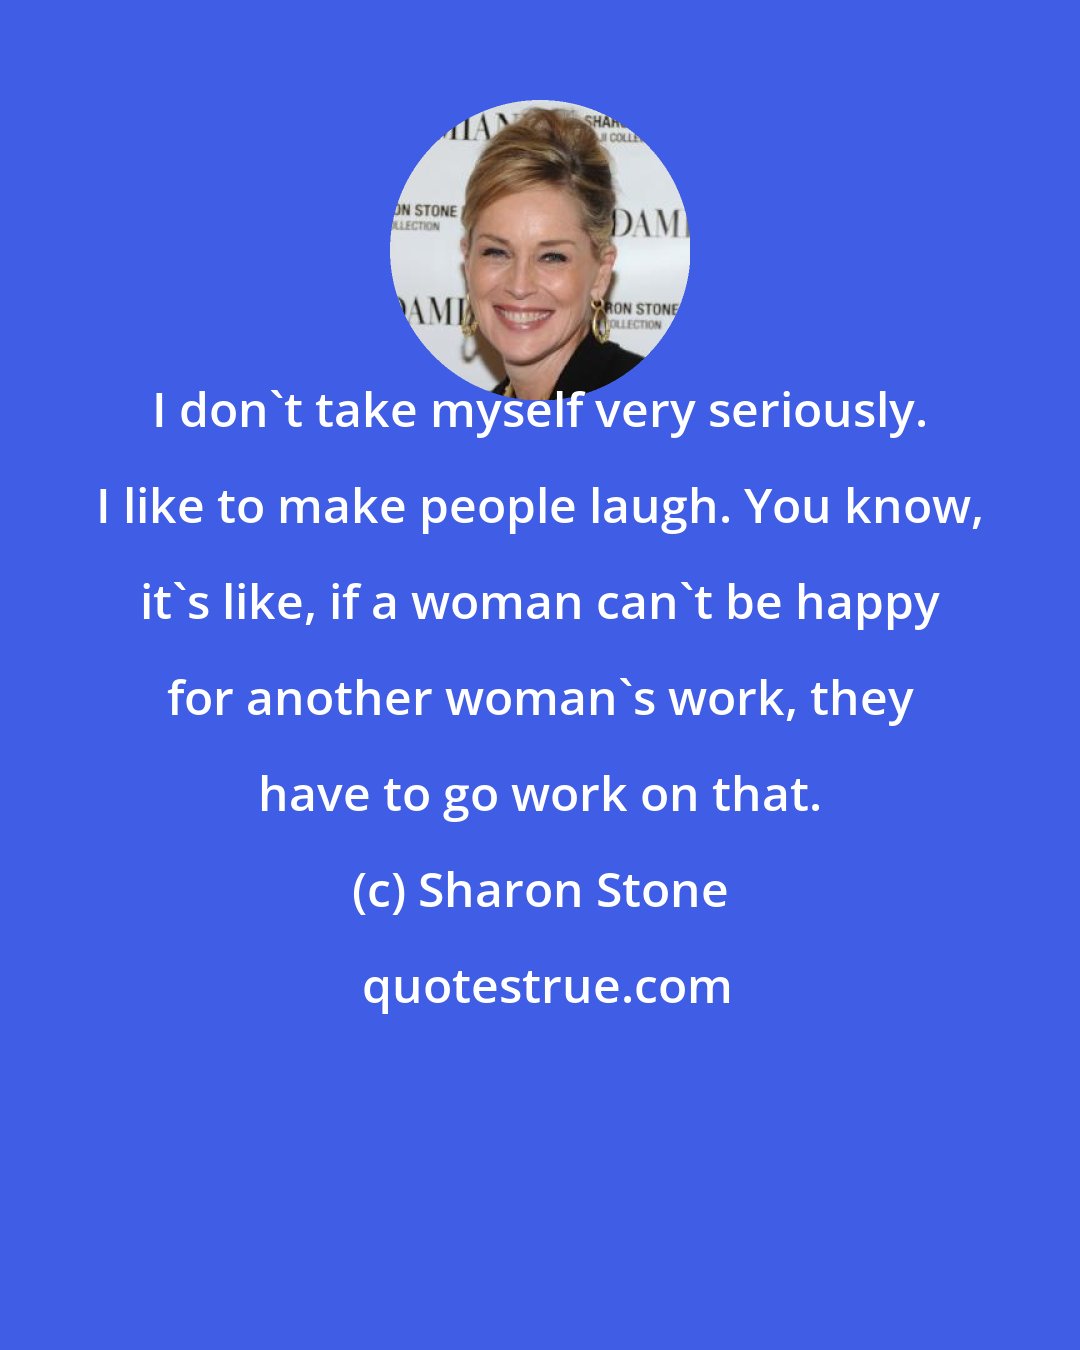 Sharon Stone: I don't take myself very seriously. I like to make people laugh. You know, it's like, if a woman can't be happy for another woman's work, they have to go work on that.